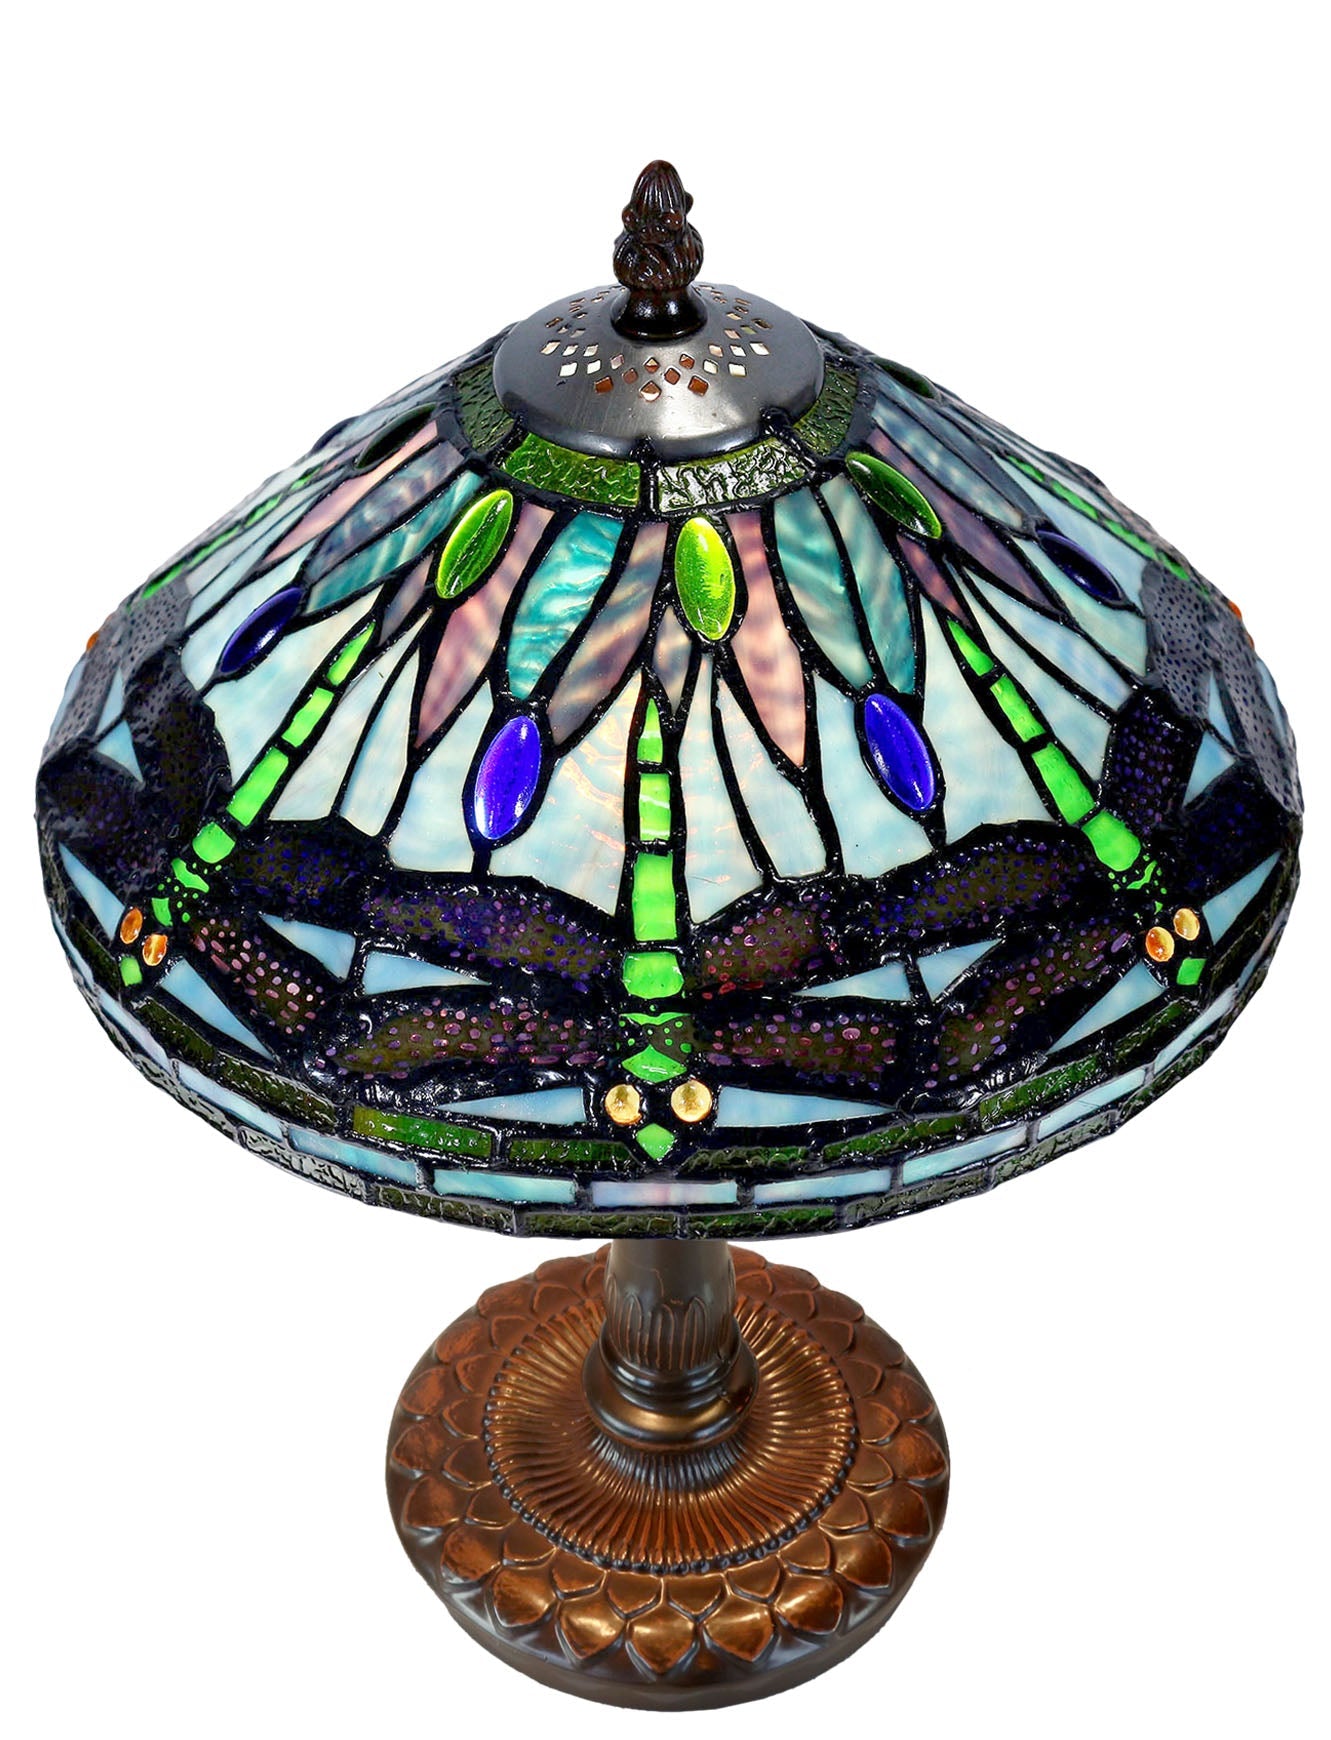 Limited Edition "Exquisite 10" @10” wide Dragonfly Style Tiffany Bedside Lamp